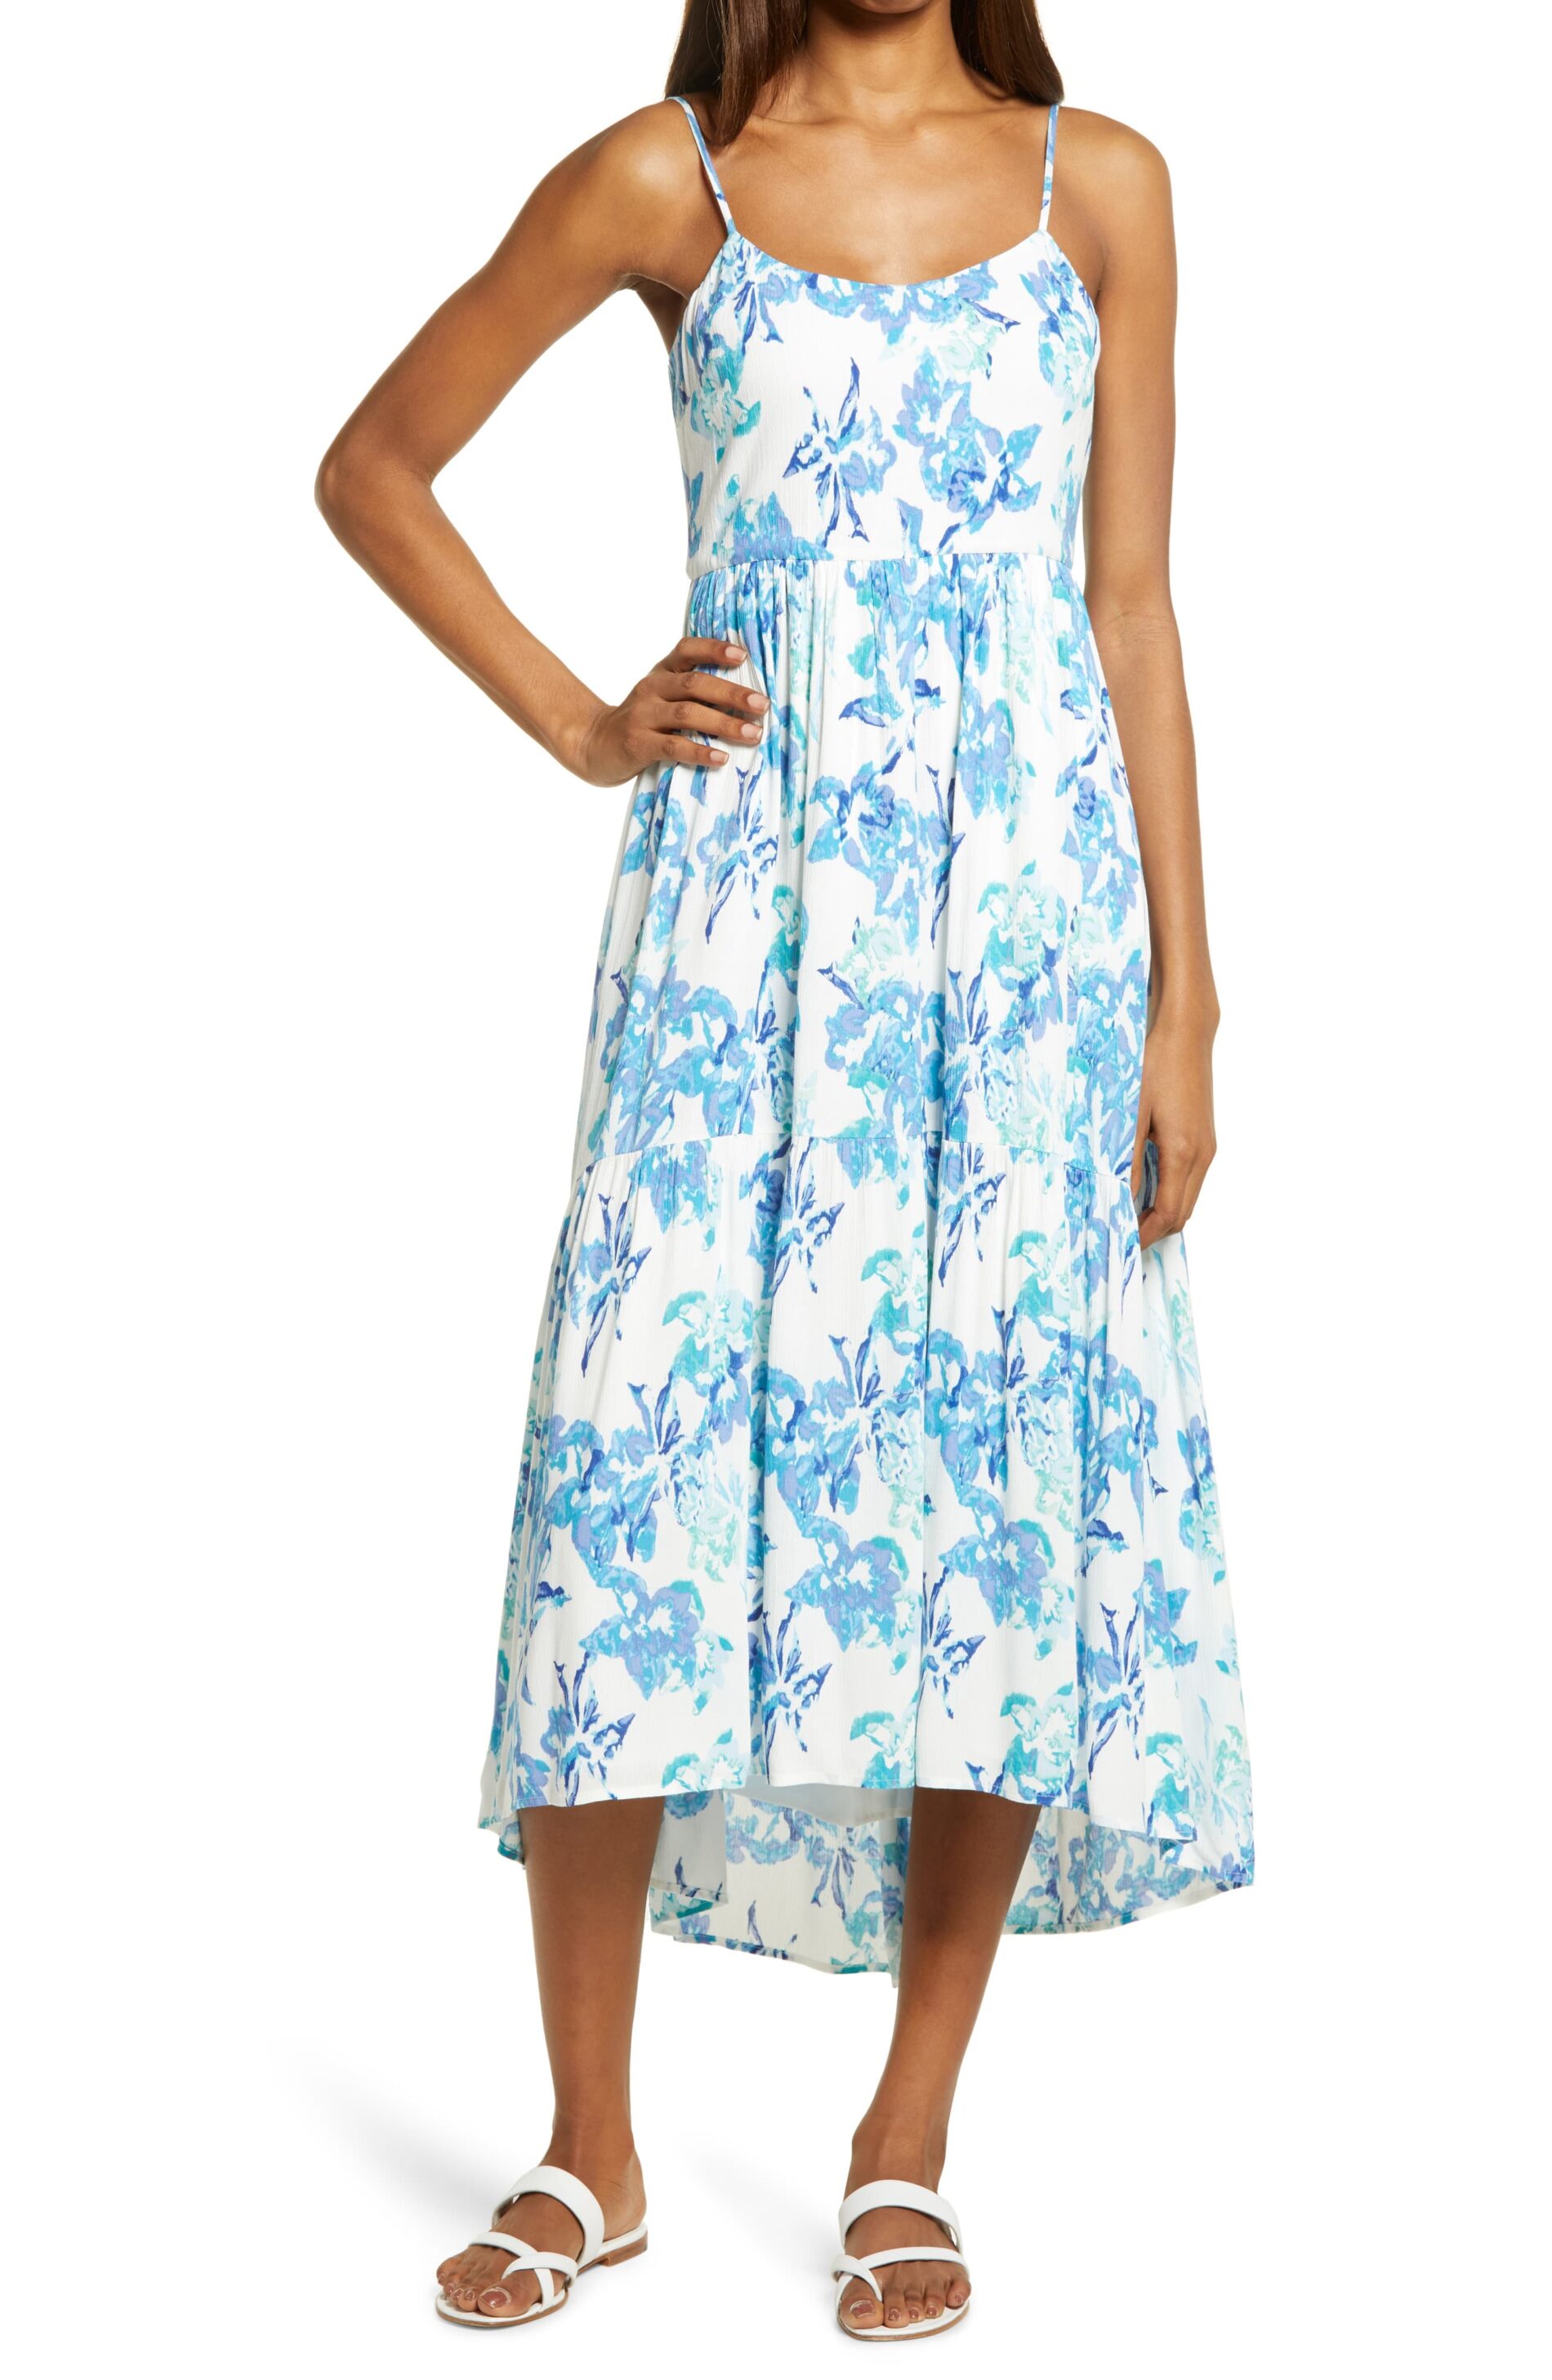 12 Popular Spring Dresses For Easter Every Fashion Love Is Eyeing